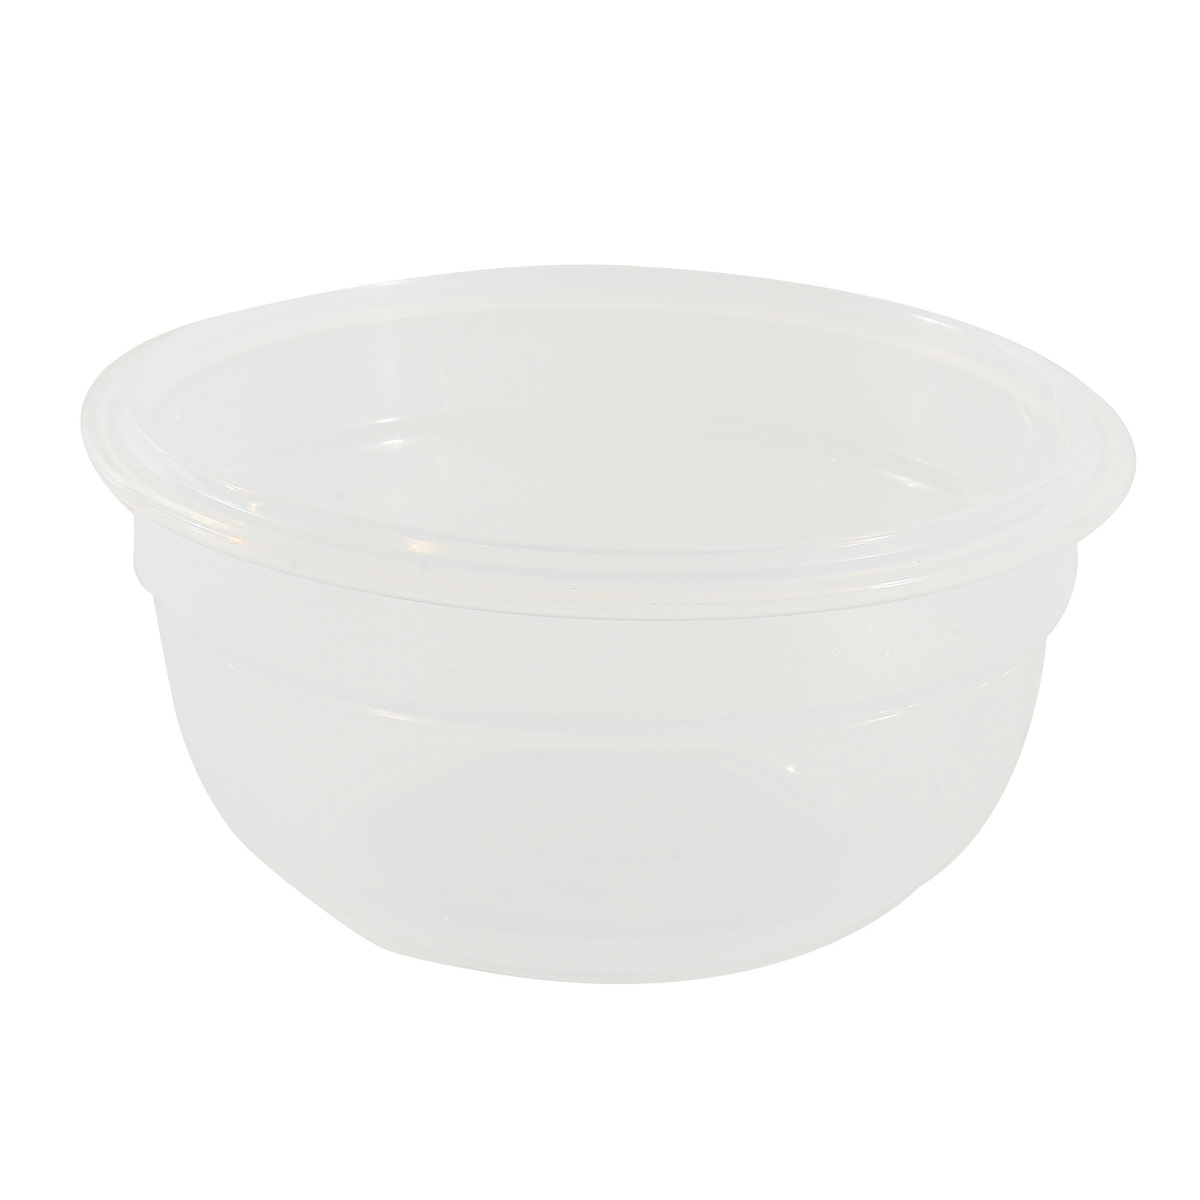 Lock & Lock Round Food Container, 480 ml, Clear, HSM943